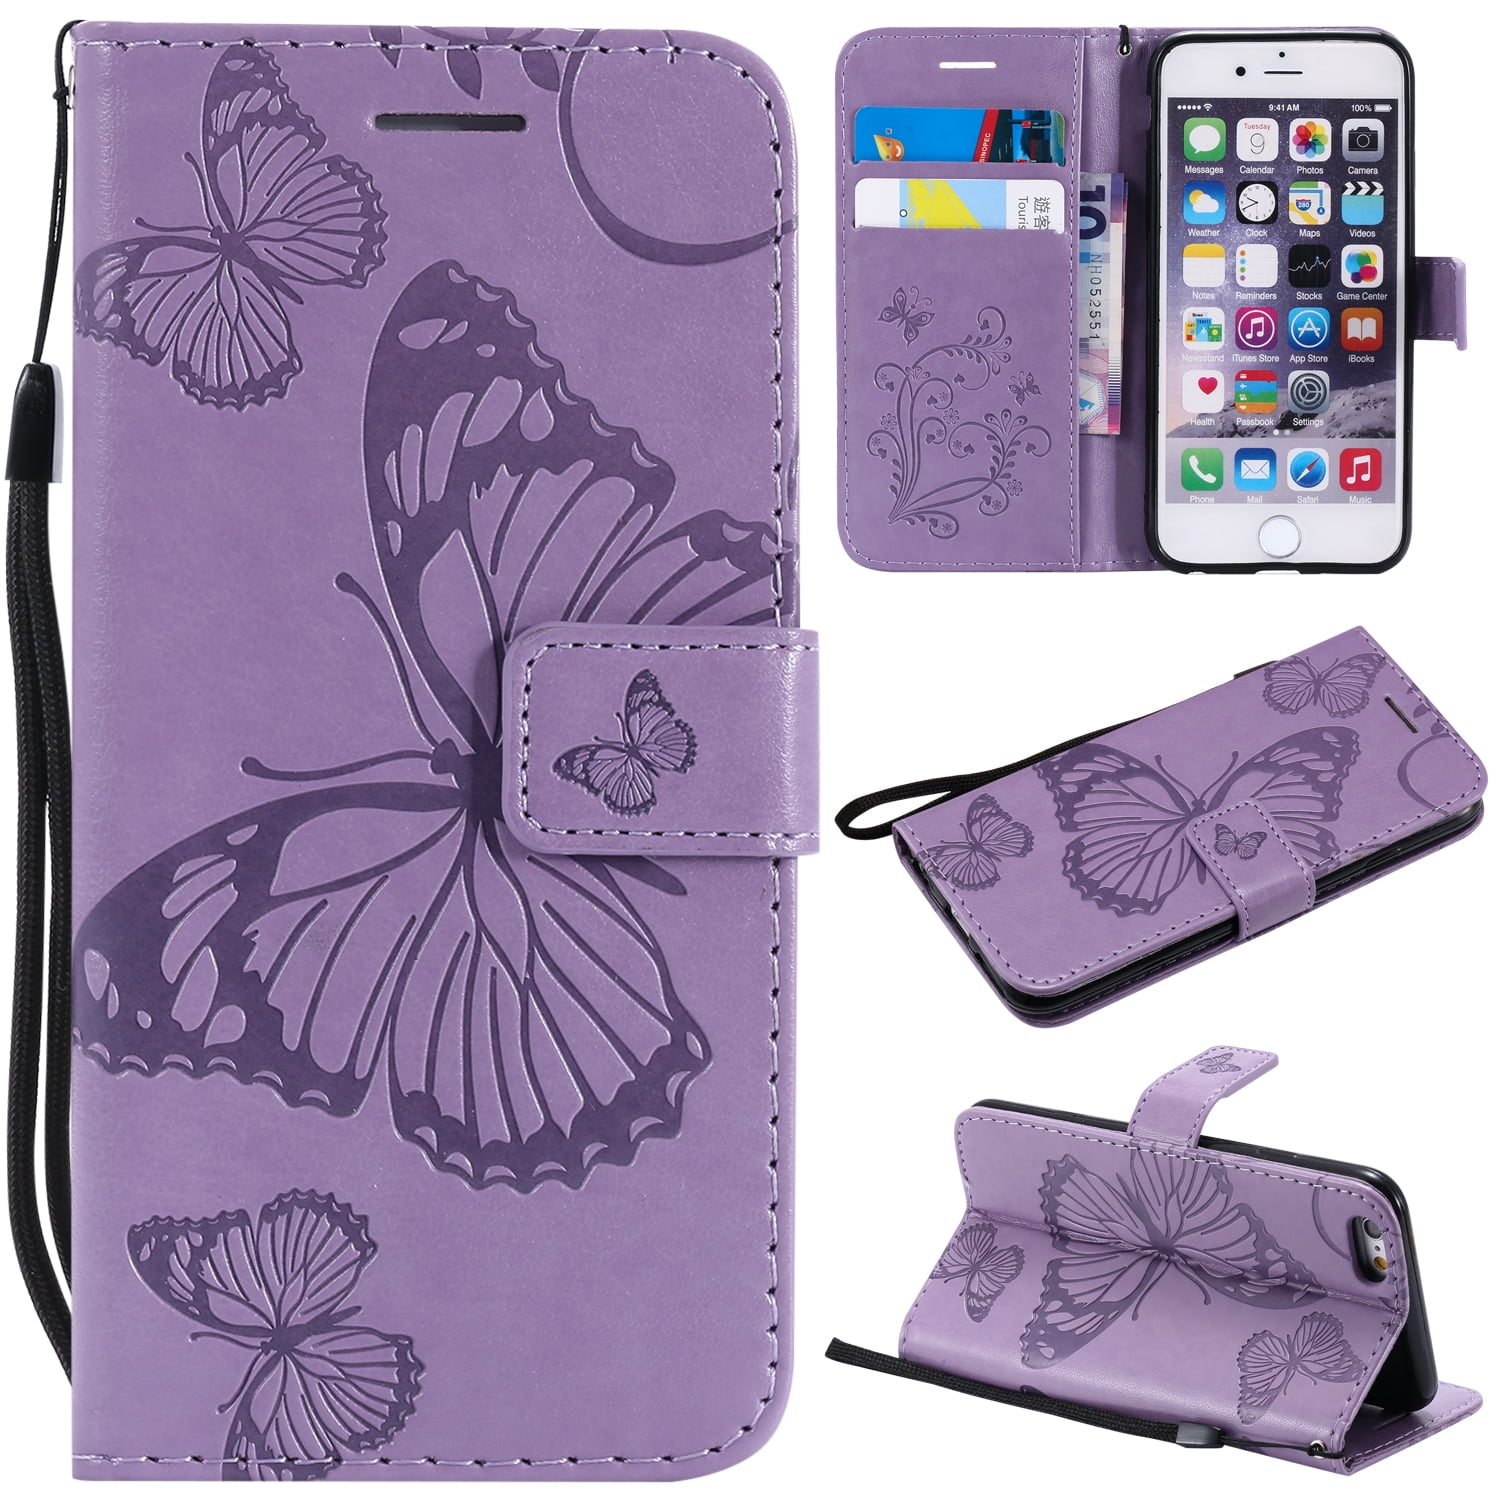 Losjes Natte sneeuw geduldig iPhone 6 Plus/ 6S Plus Wallet case, Allytech Pretty Retro Embossed  Butterfly Flower Design PU Leather Book Style Wallet Flip Case Cover for Apple  iPhone 6 Plus and iPhone 6S Plus, Blue -